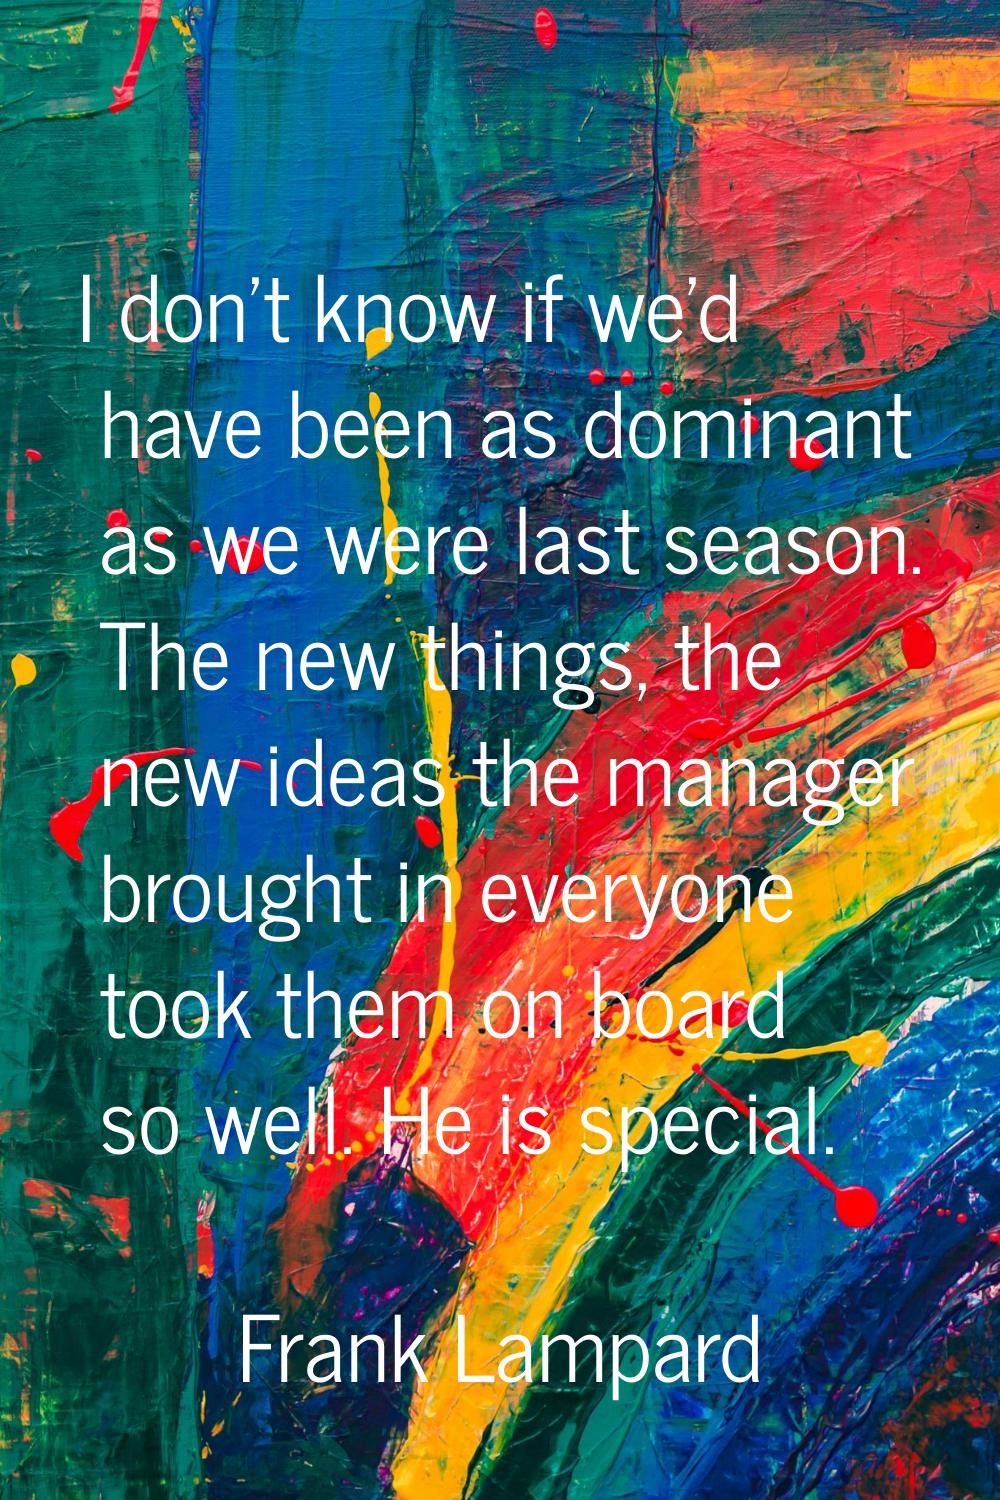 I don't know if we'd have been as dominant as we were last season. The new things, the new ideas th